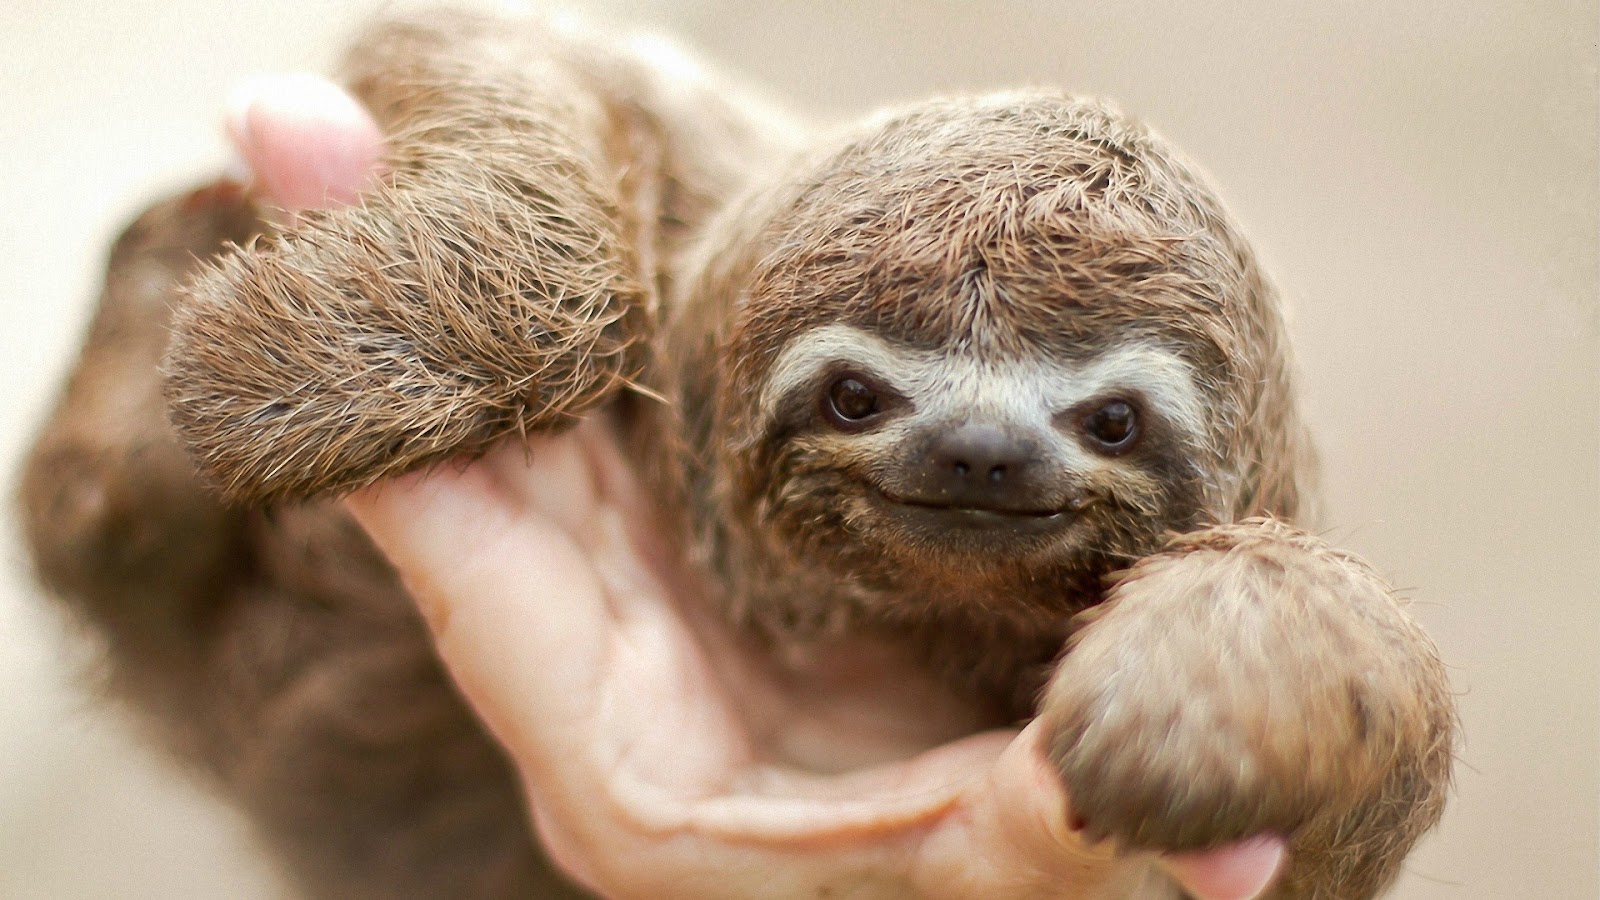 Twisteds Wallpapers A Smiling Baby Sloth